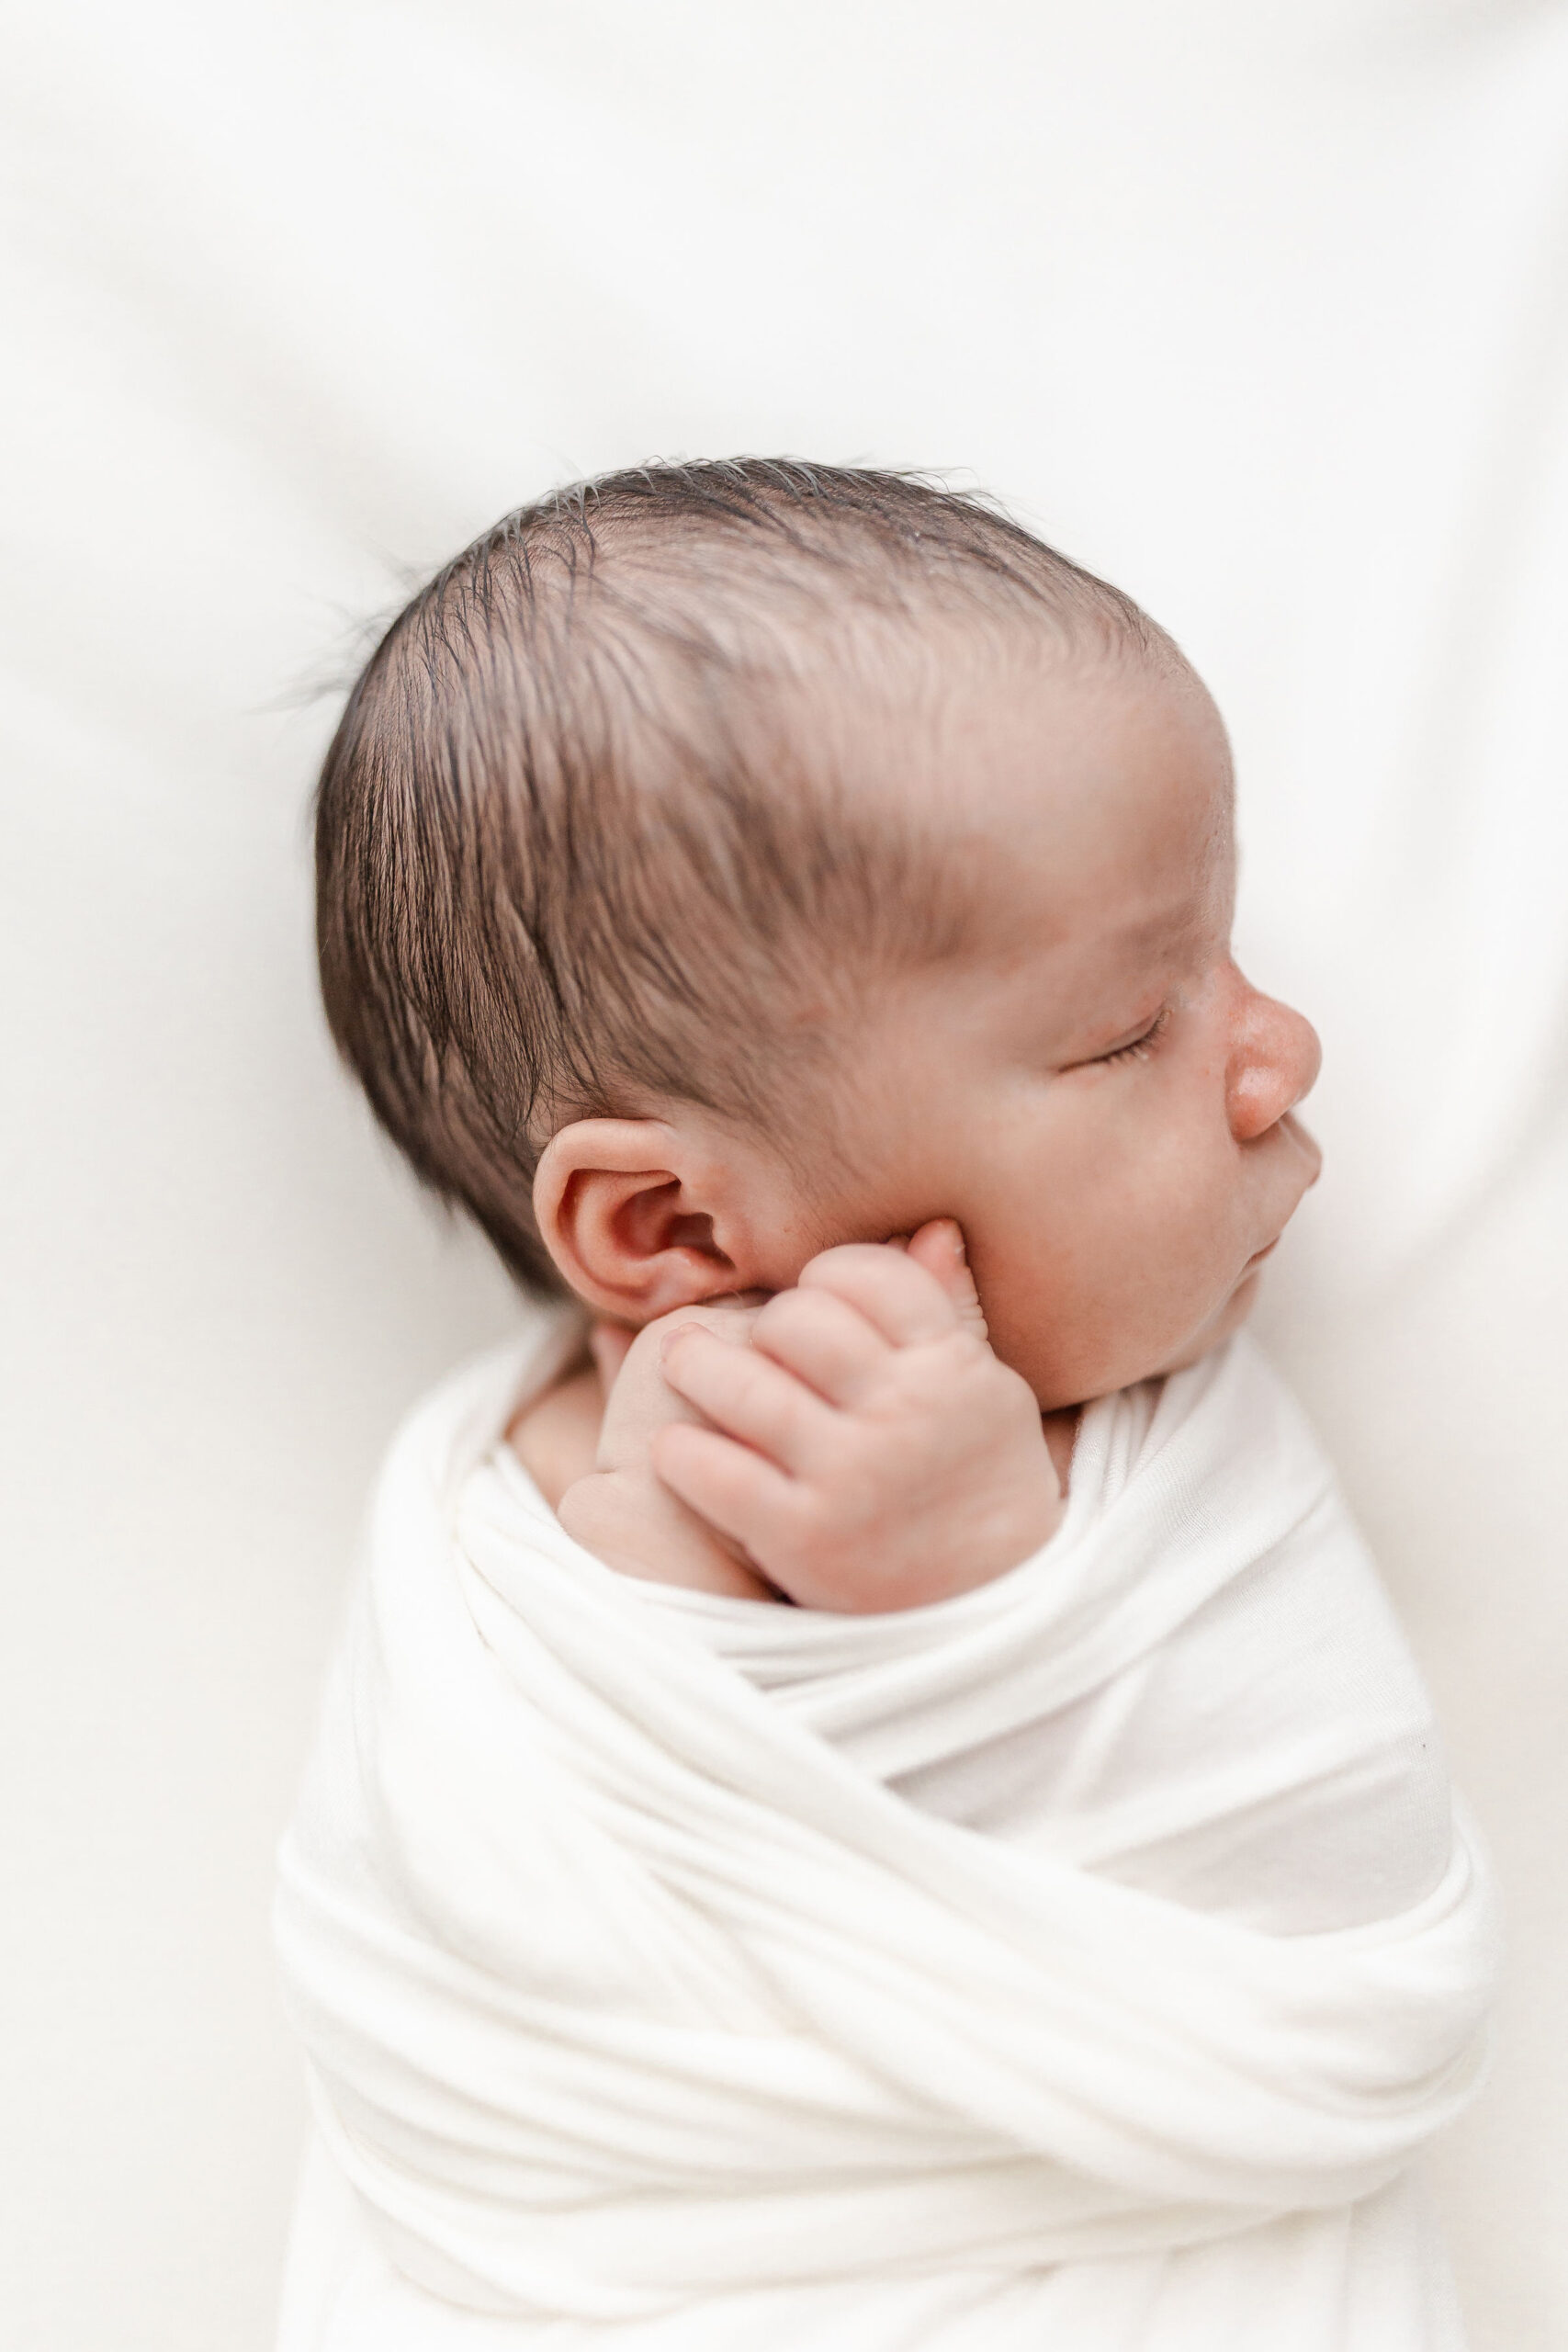 A newborn baby sleeps in a white swaddle on a white bed with hands on its cheek